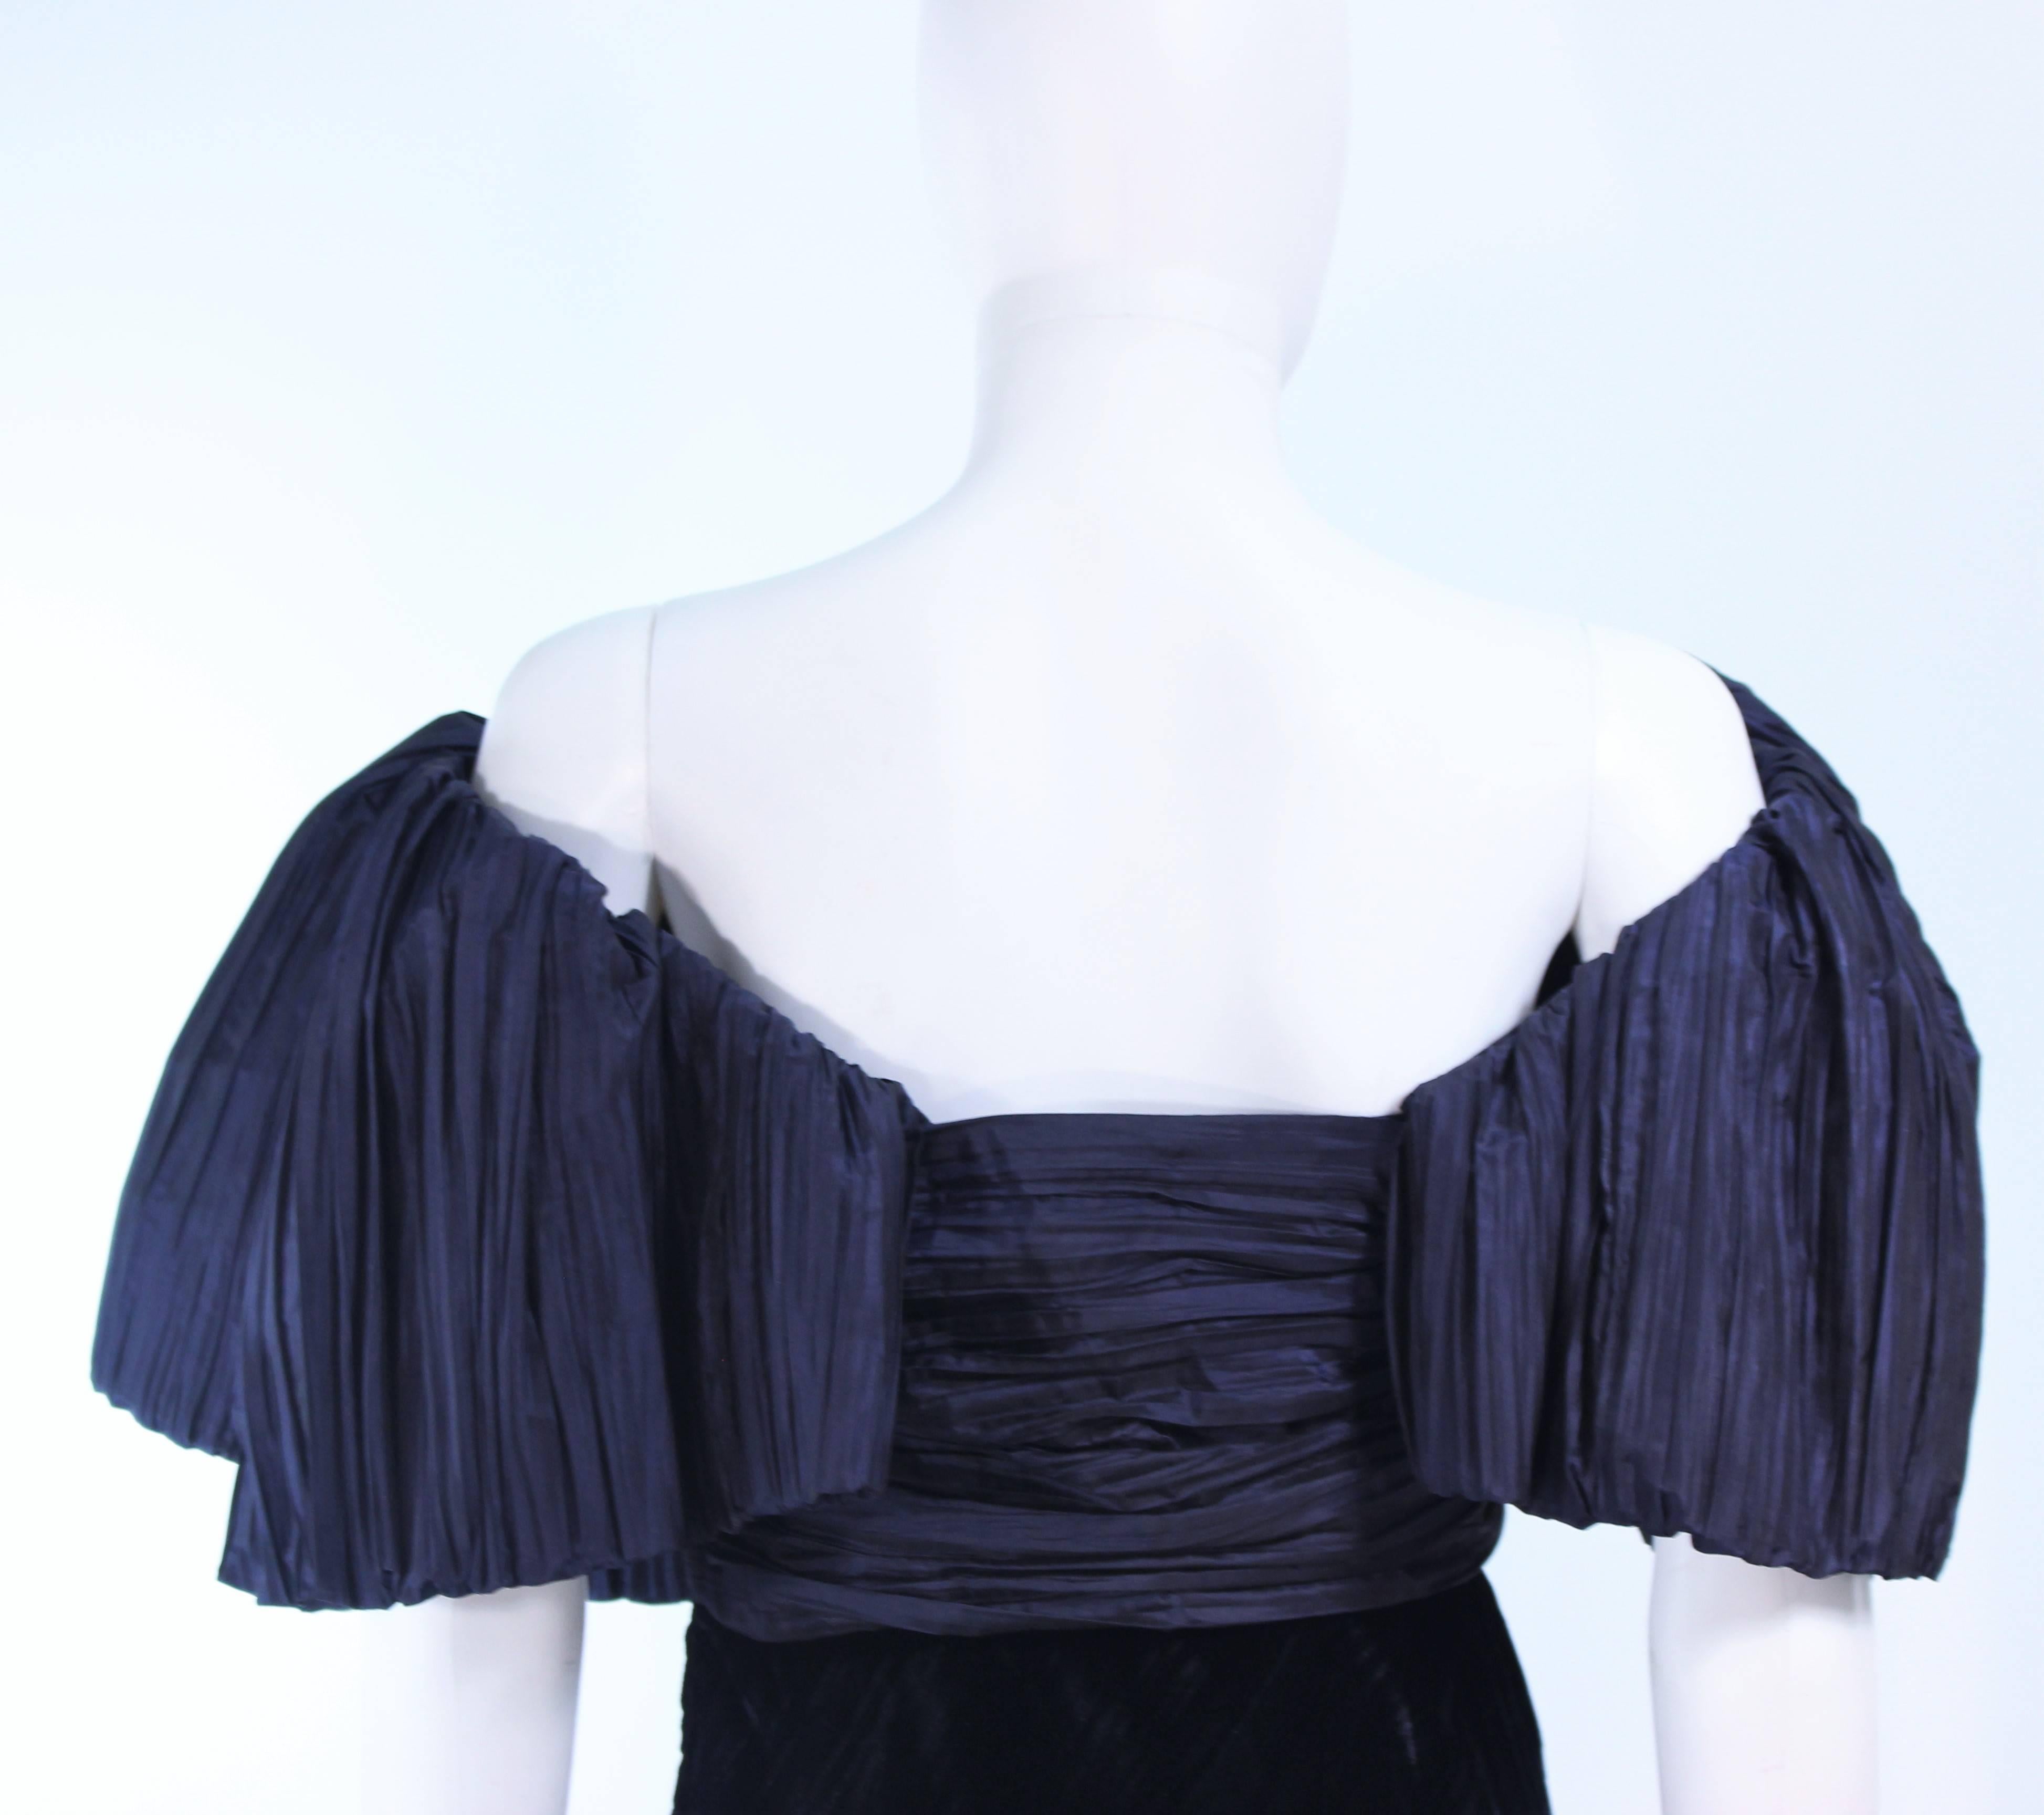 JACQUELINE DE RIBES Gown Navy Bias Velvet and Pleated Bodice Size 6 8 3